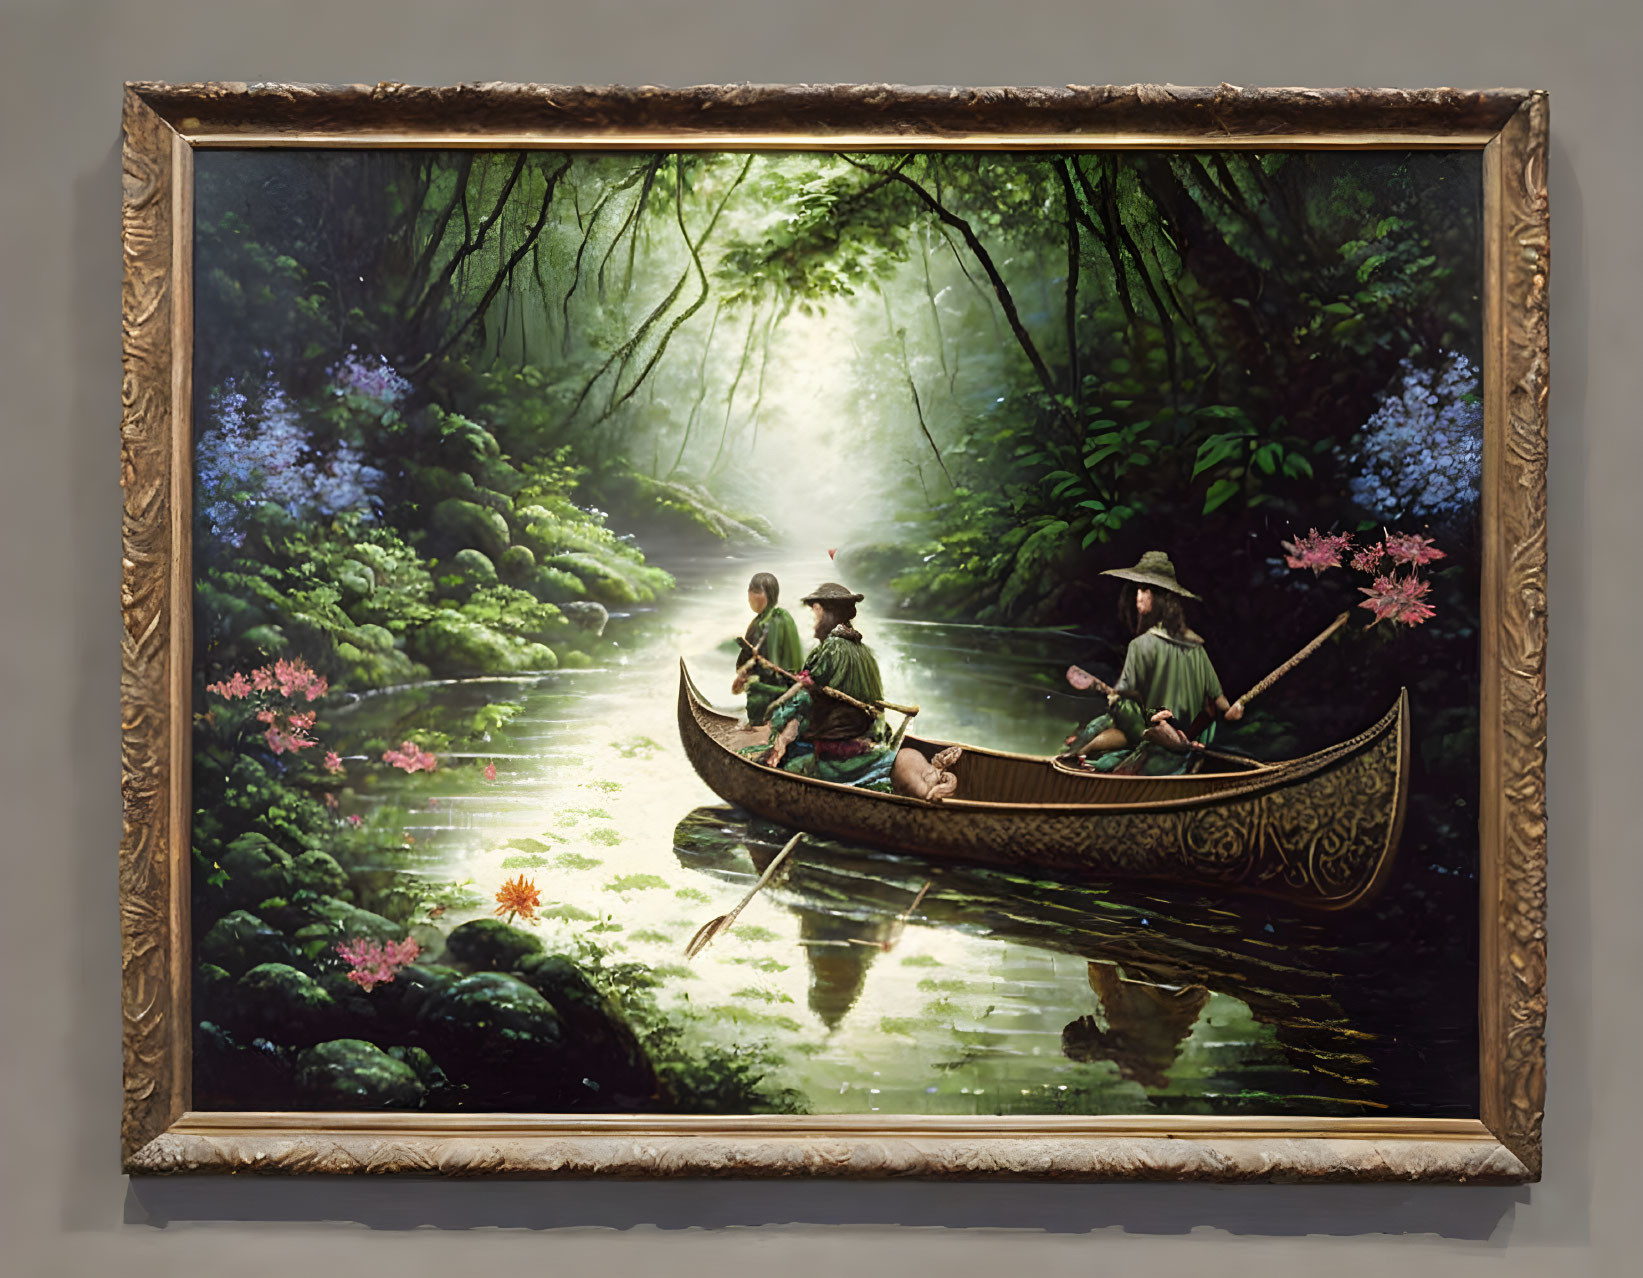 Framed Painting Of The Amazon Jungle